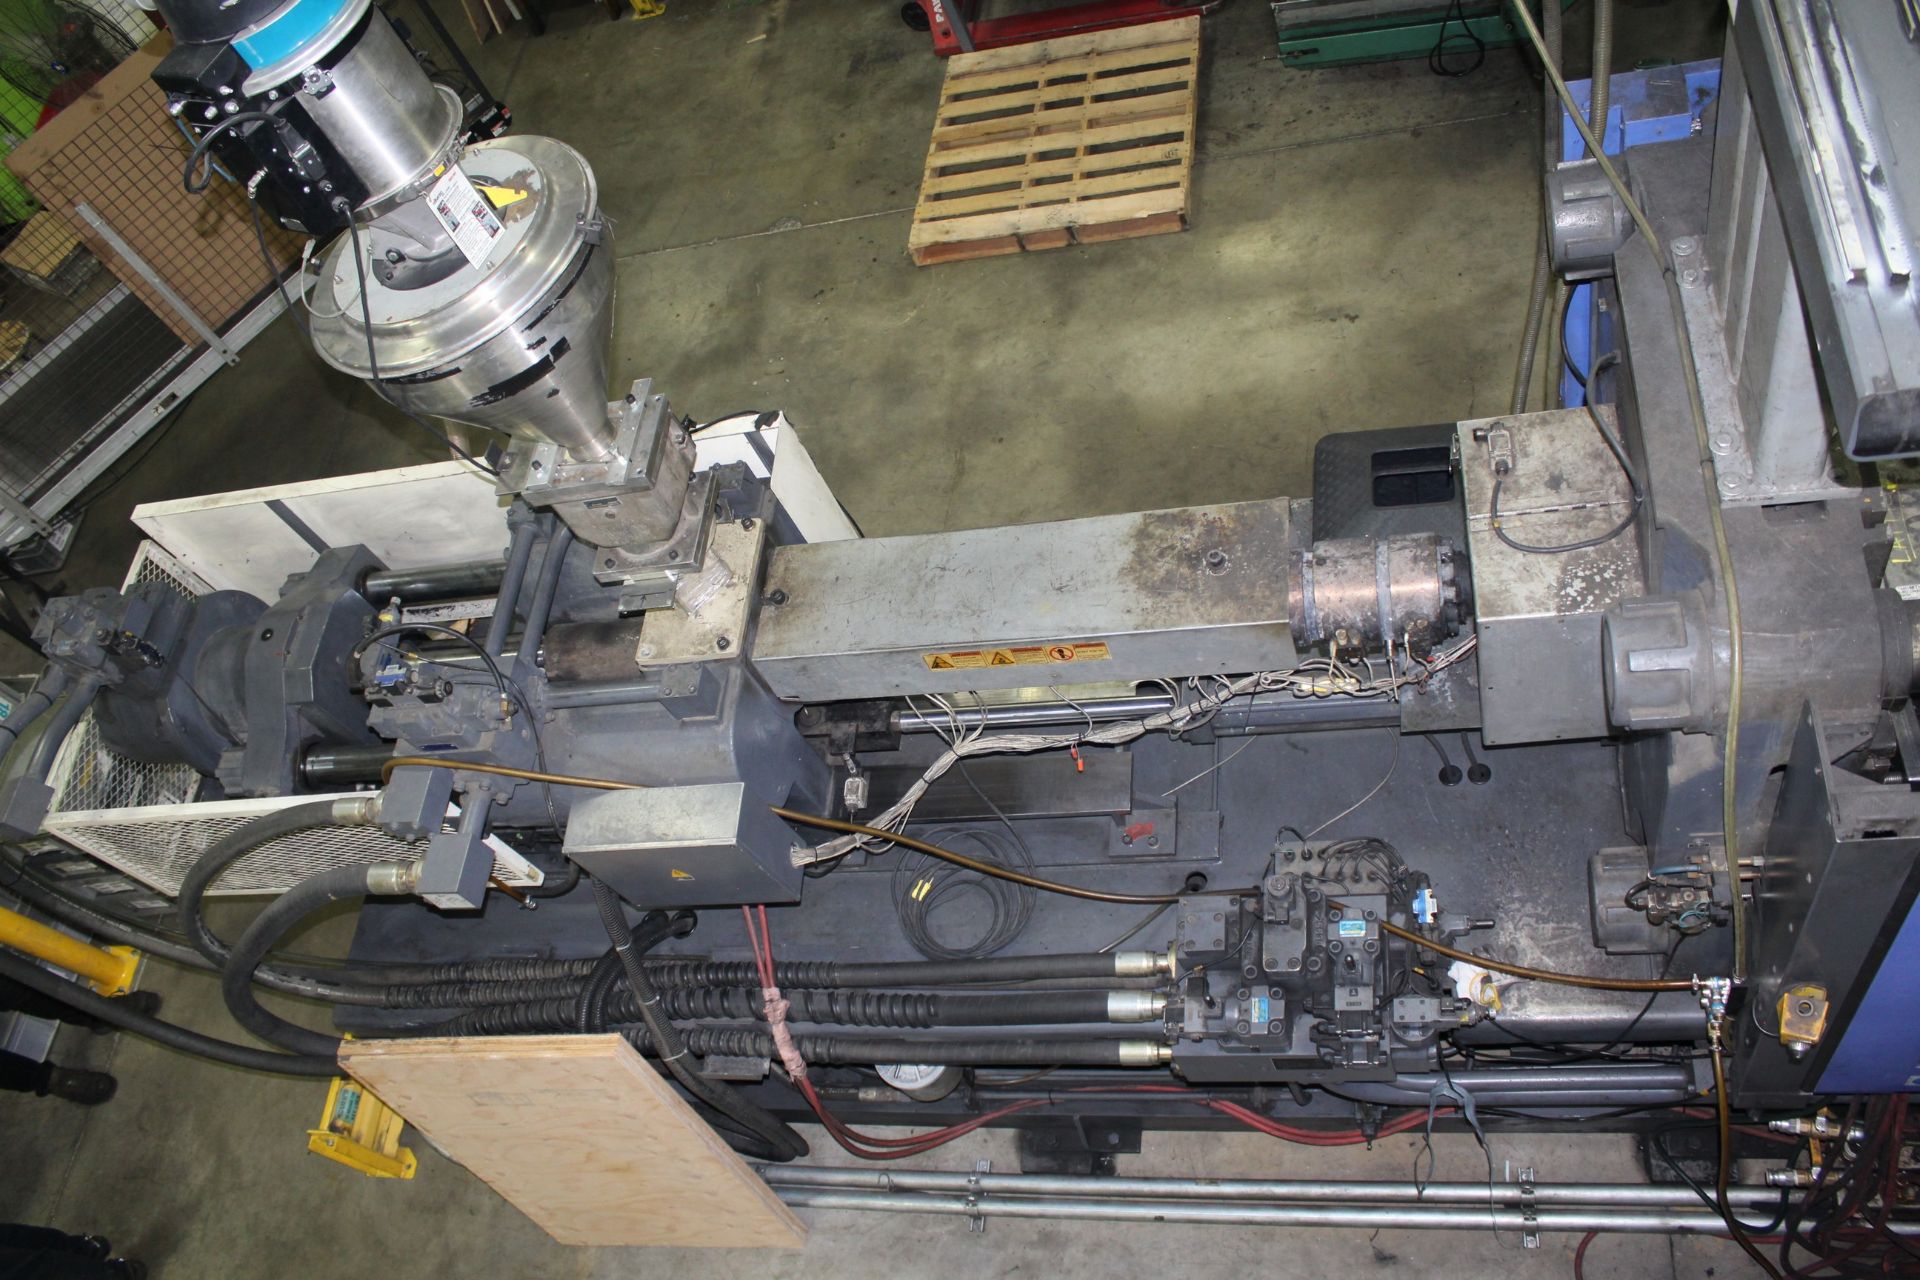 LG GOLD STAR 500H INJECTION MOLDER, 500-TON CAP. - Image 22 of 38